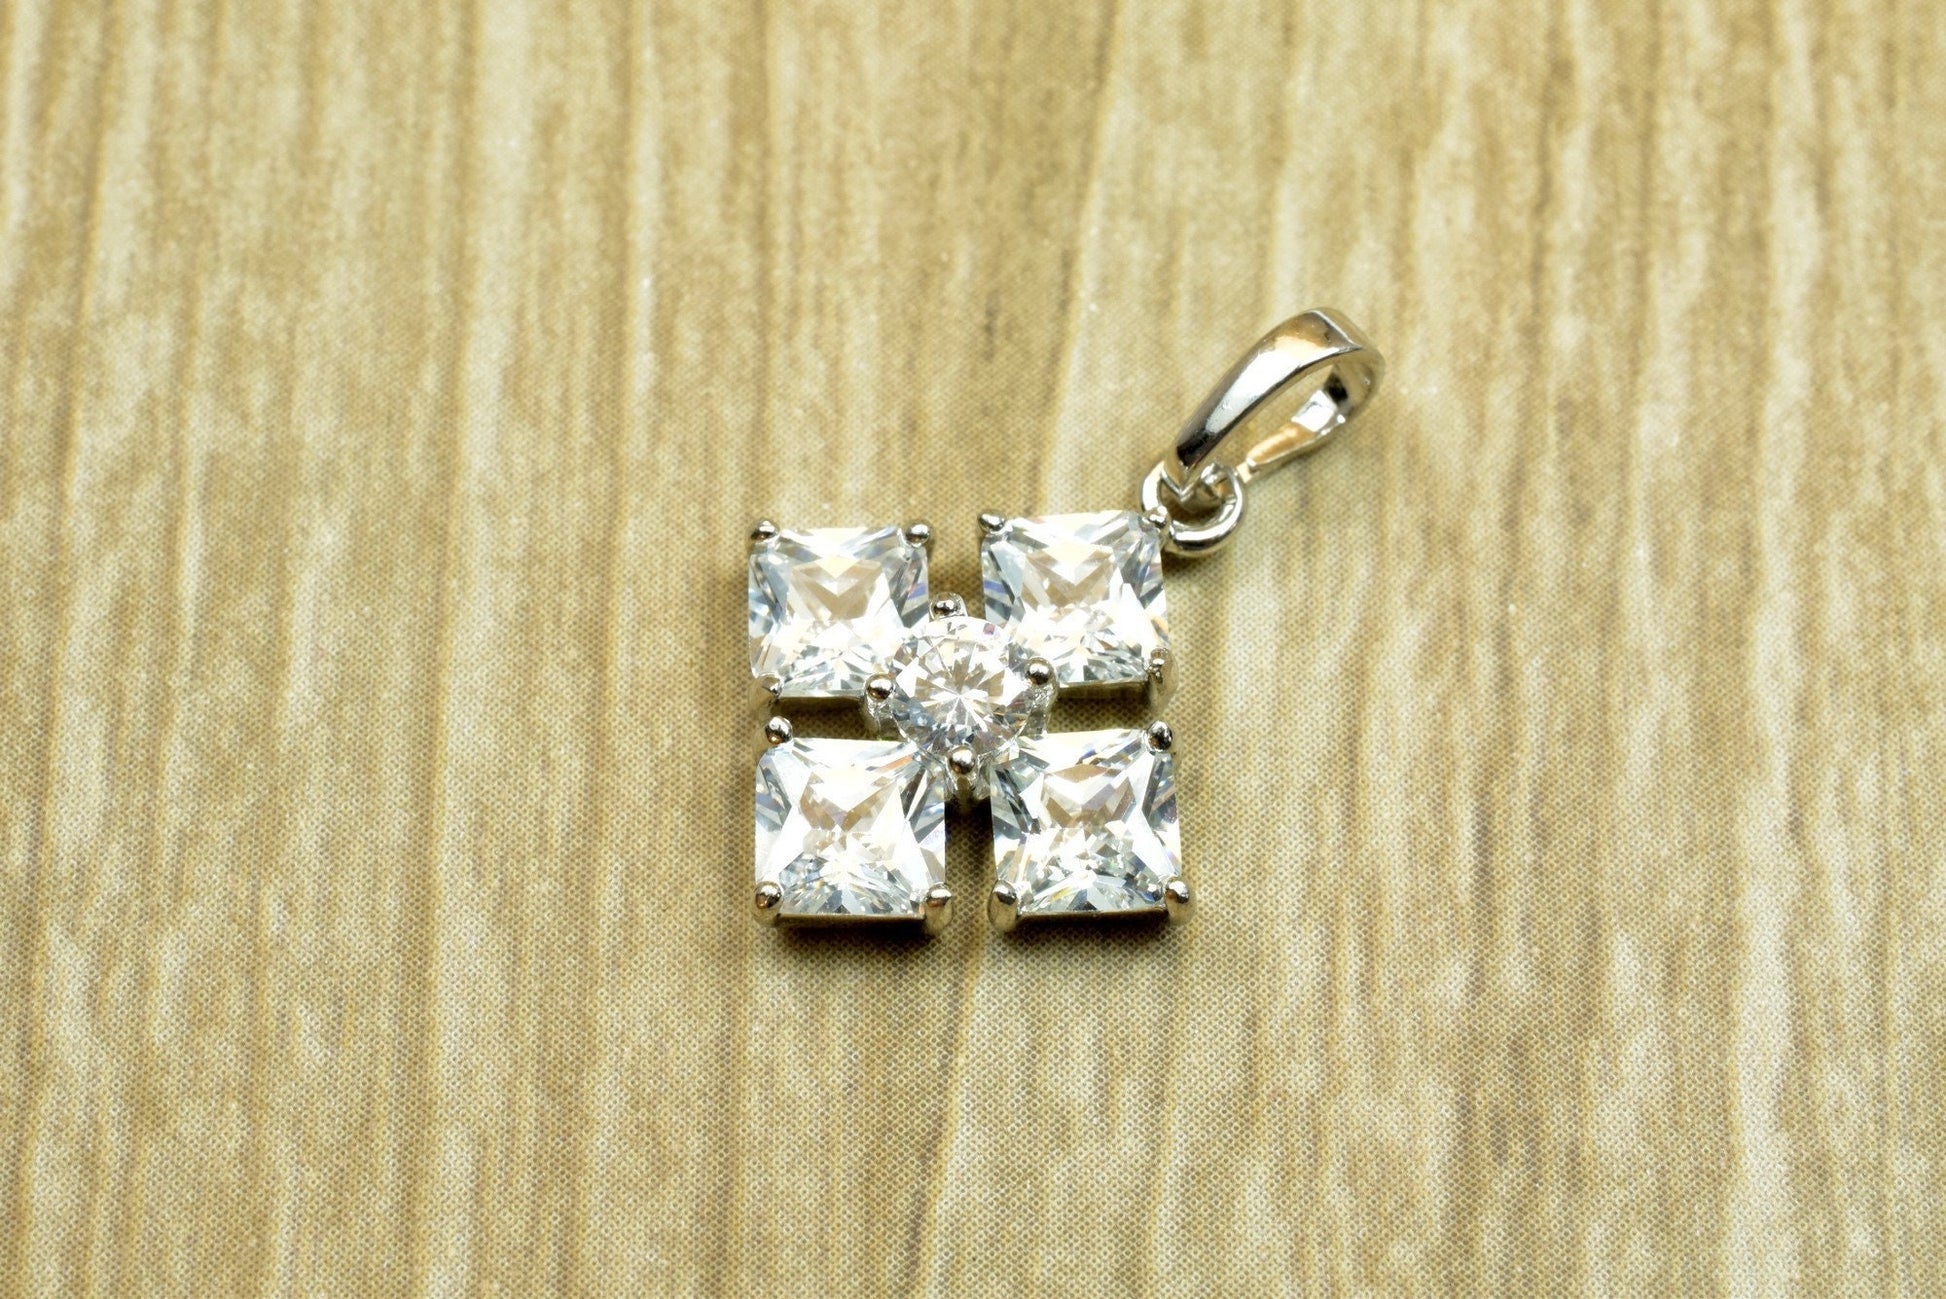 White gold filled cross pendant clear cz cubic zircon rhinestone rhodium plated charm size 19x16mm thickness 5mm findings for jewelry making